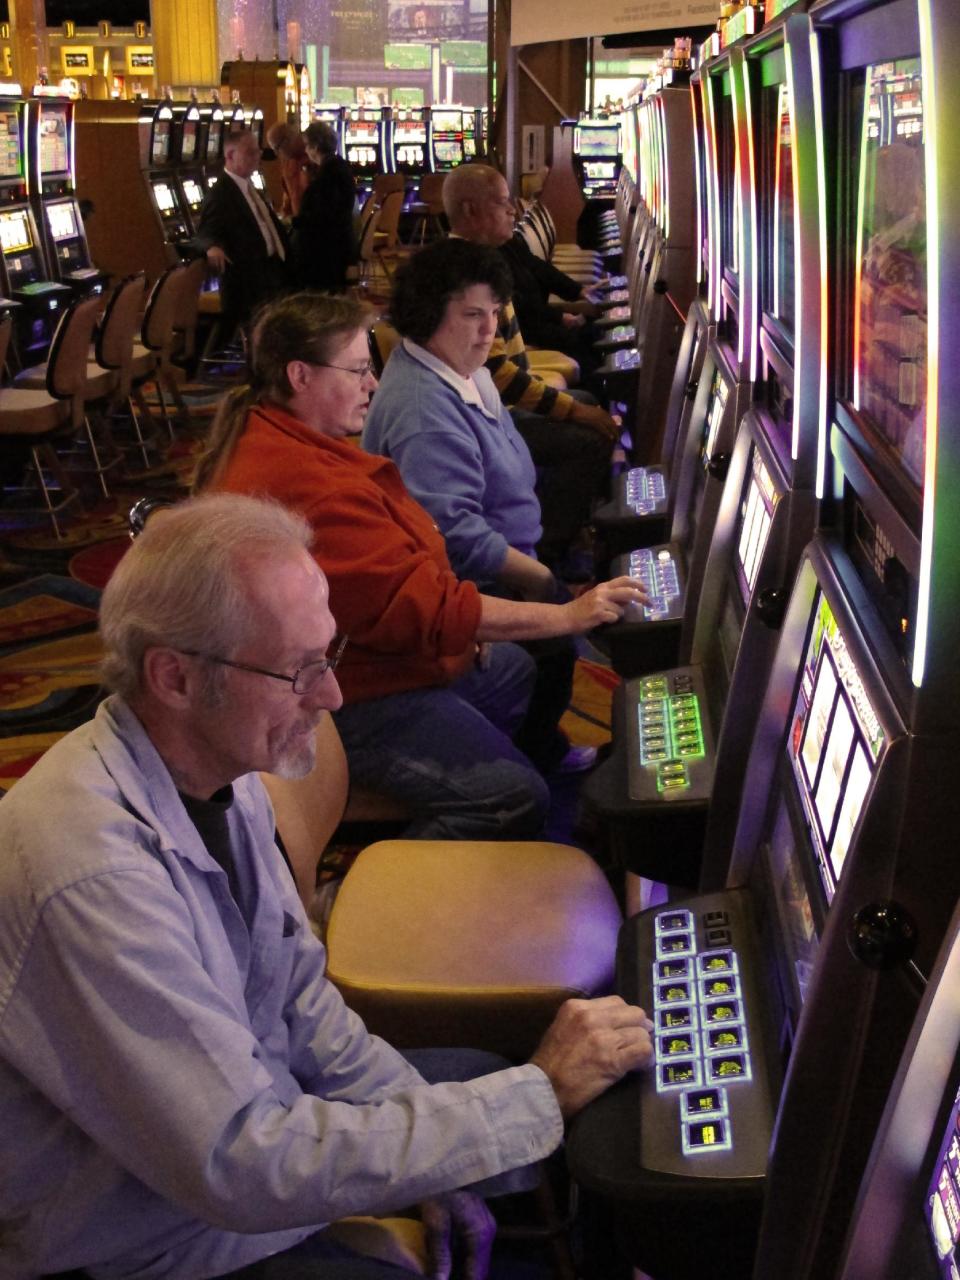 Area resident Jerry Franklin, bottom left, celebrates his 56th birthday by joining other gamblers at the slot machines as the Hollywood Casino Columbus opens on Monday Oct. 8, 2012, in Columbus, Ohio. The $400 million Hollywood Casino Columbus is expected to draw 3 million visitors annually. (AP Photo/Kantele Franko.)